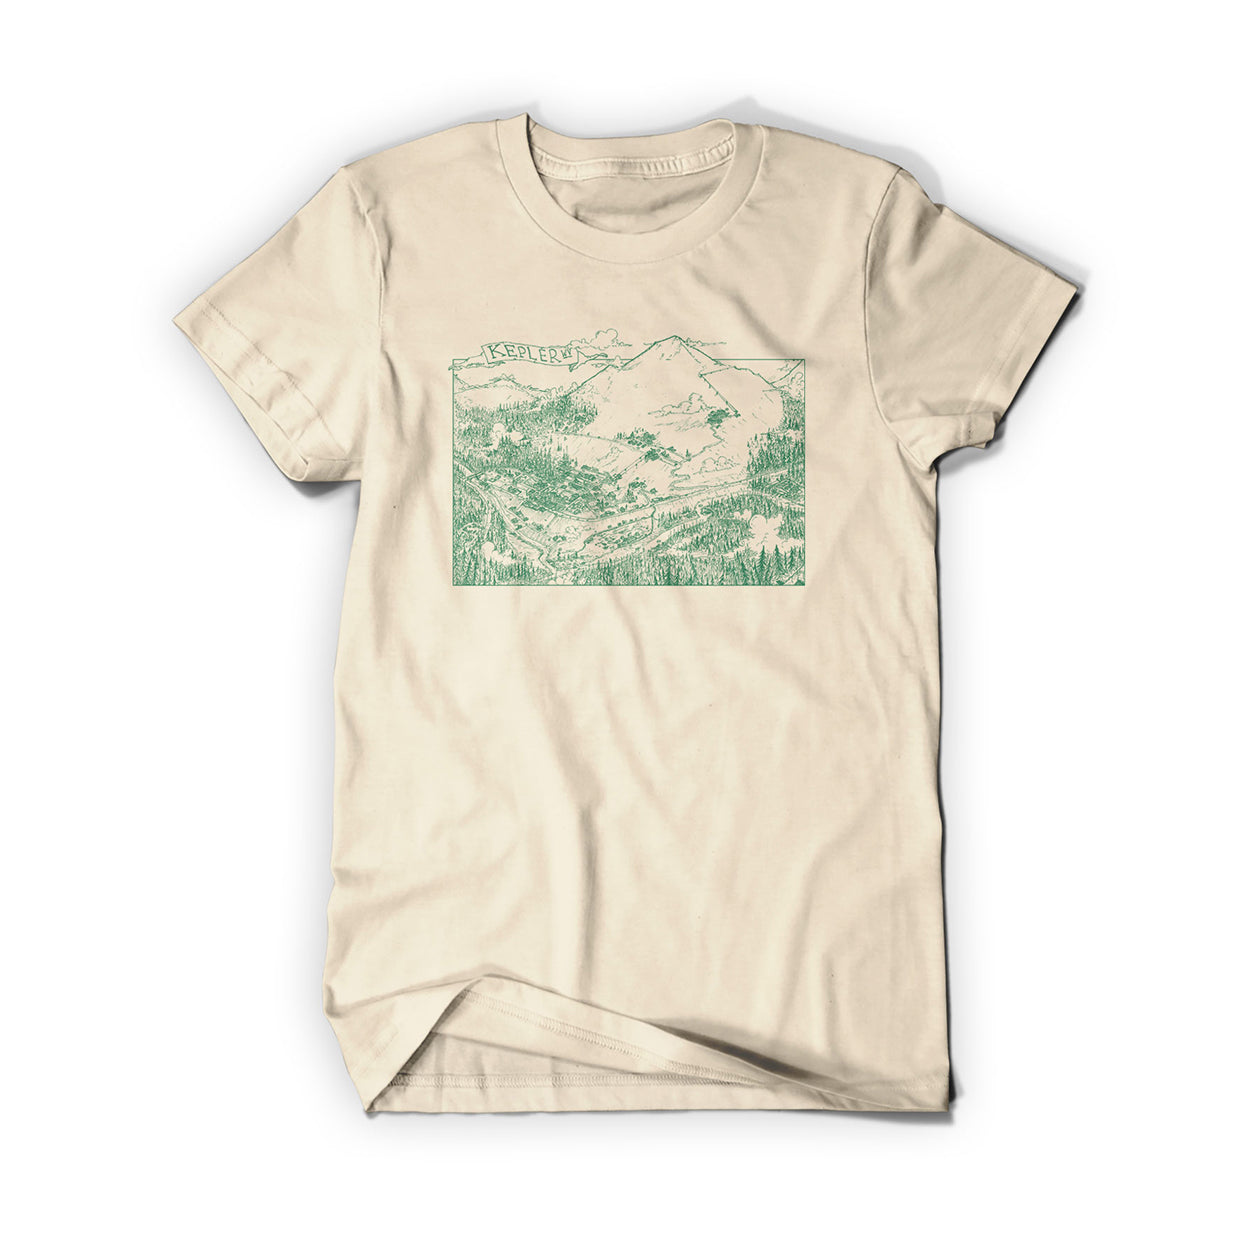 A cream colored tee shirt. There is a green line drawing of a town between a tall mountain and a sprawling forest. At the top of the illustration is a banner that says, "Kepler WV".